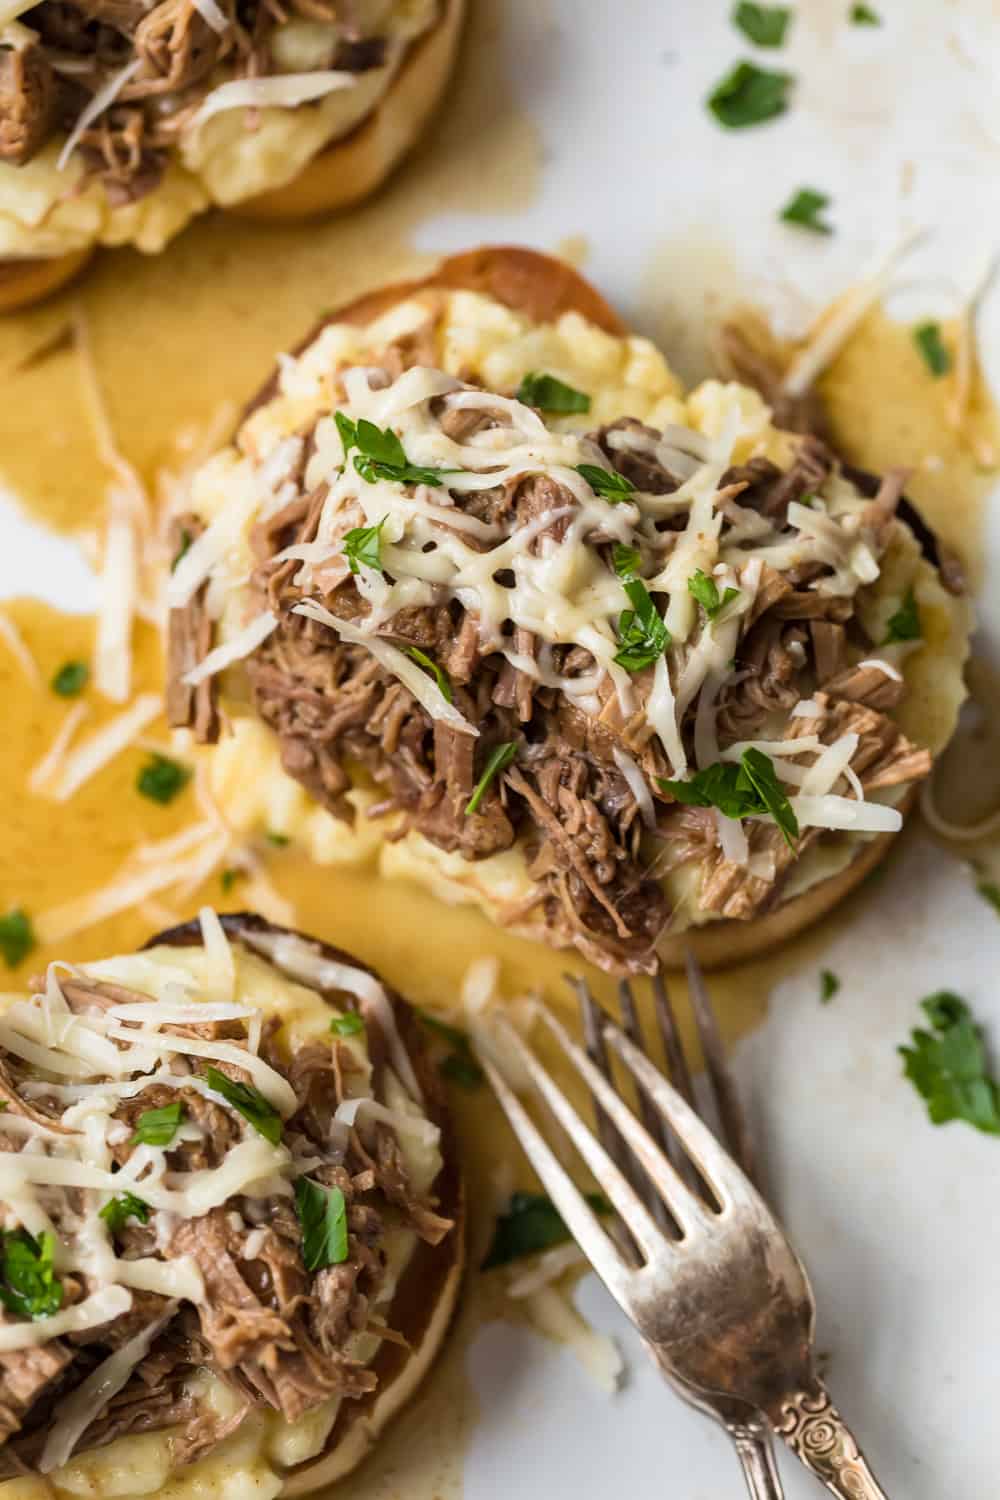 Shredded cheese on top of the Open-Faced Roast Beef Sandwich.